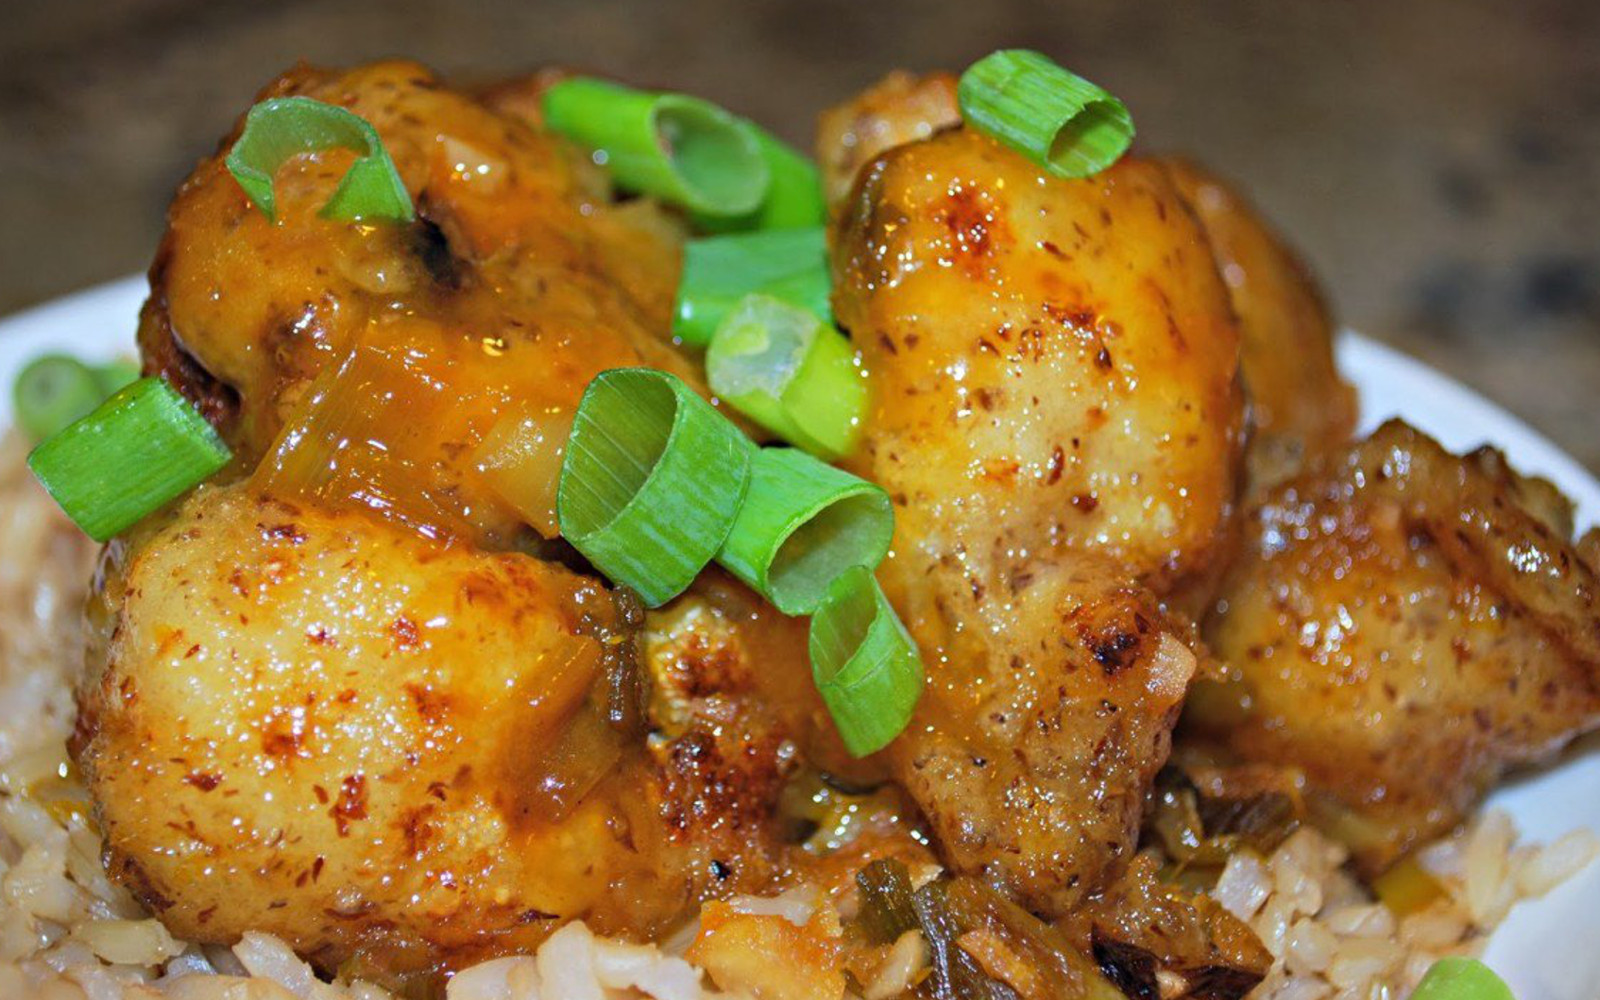 Screw National Poultry Day! These 25 Bad-Ass Recipes Don't Need No Chickens in Them